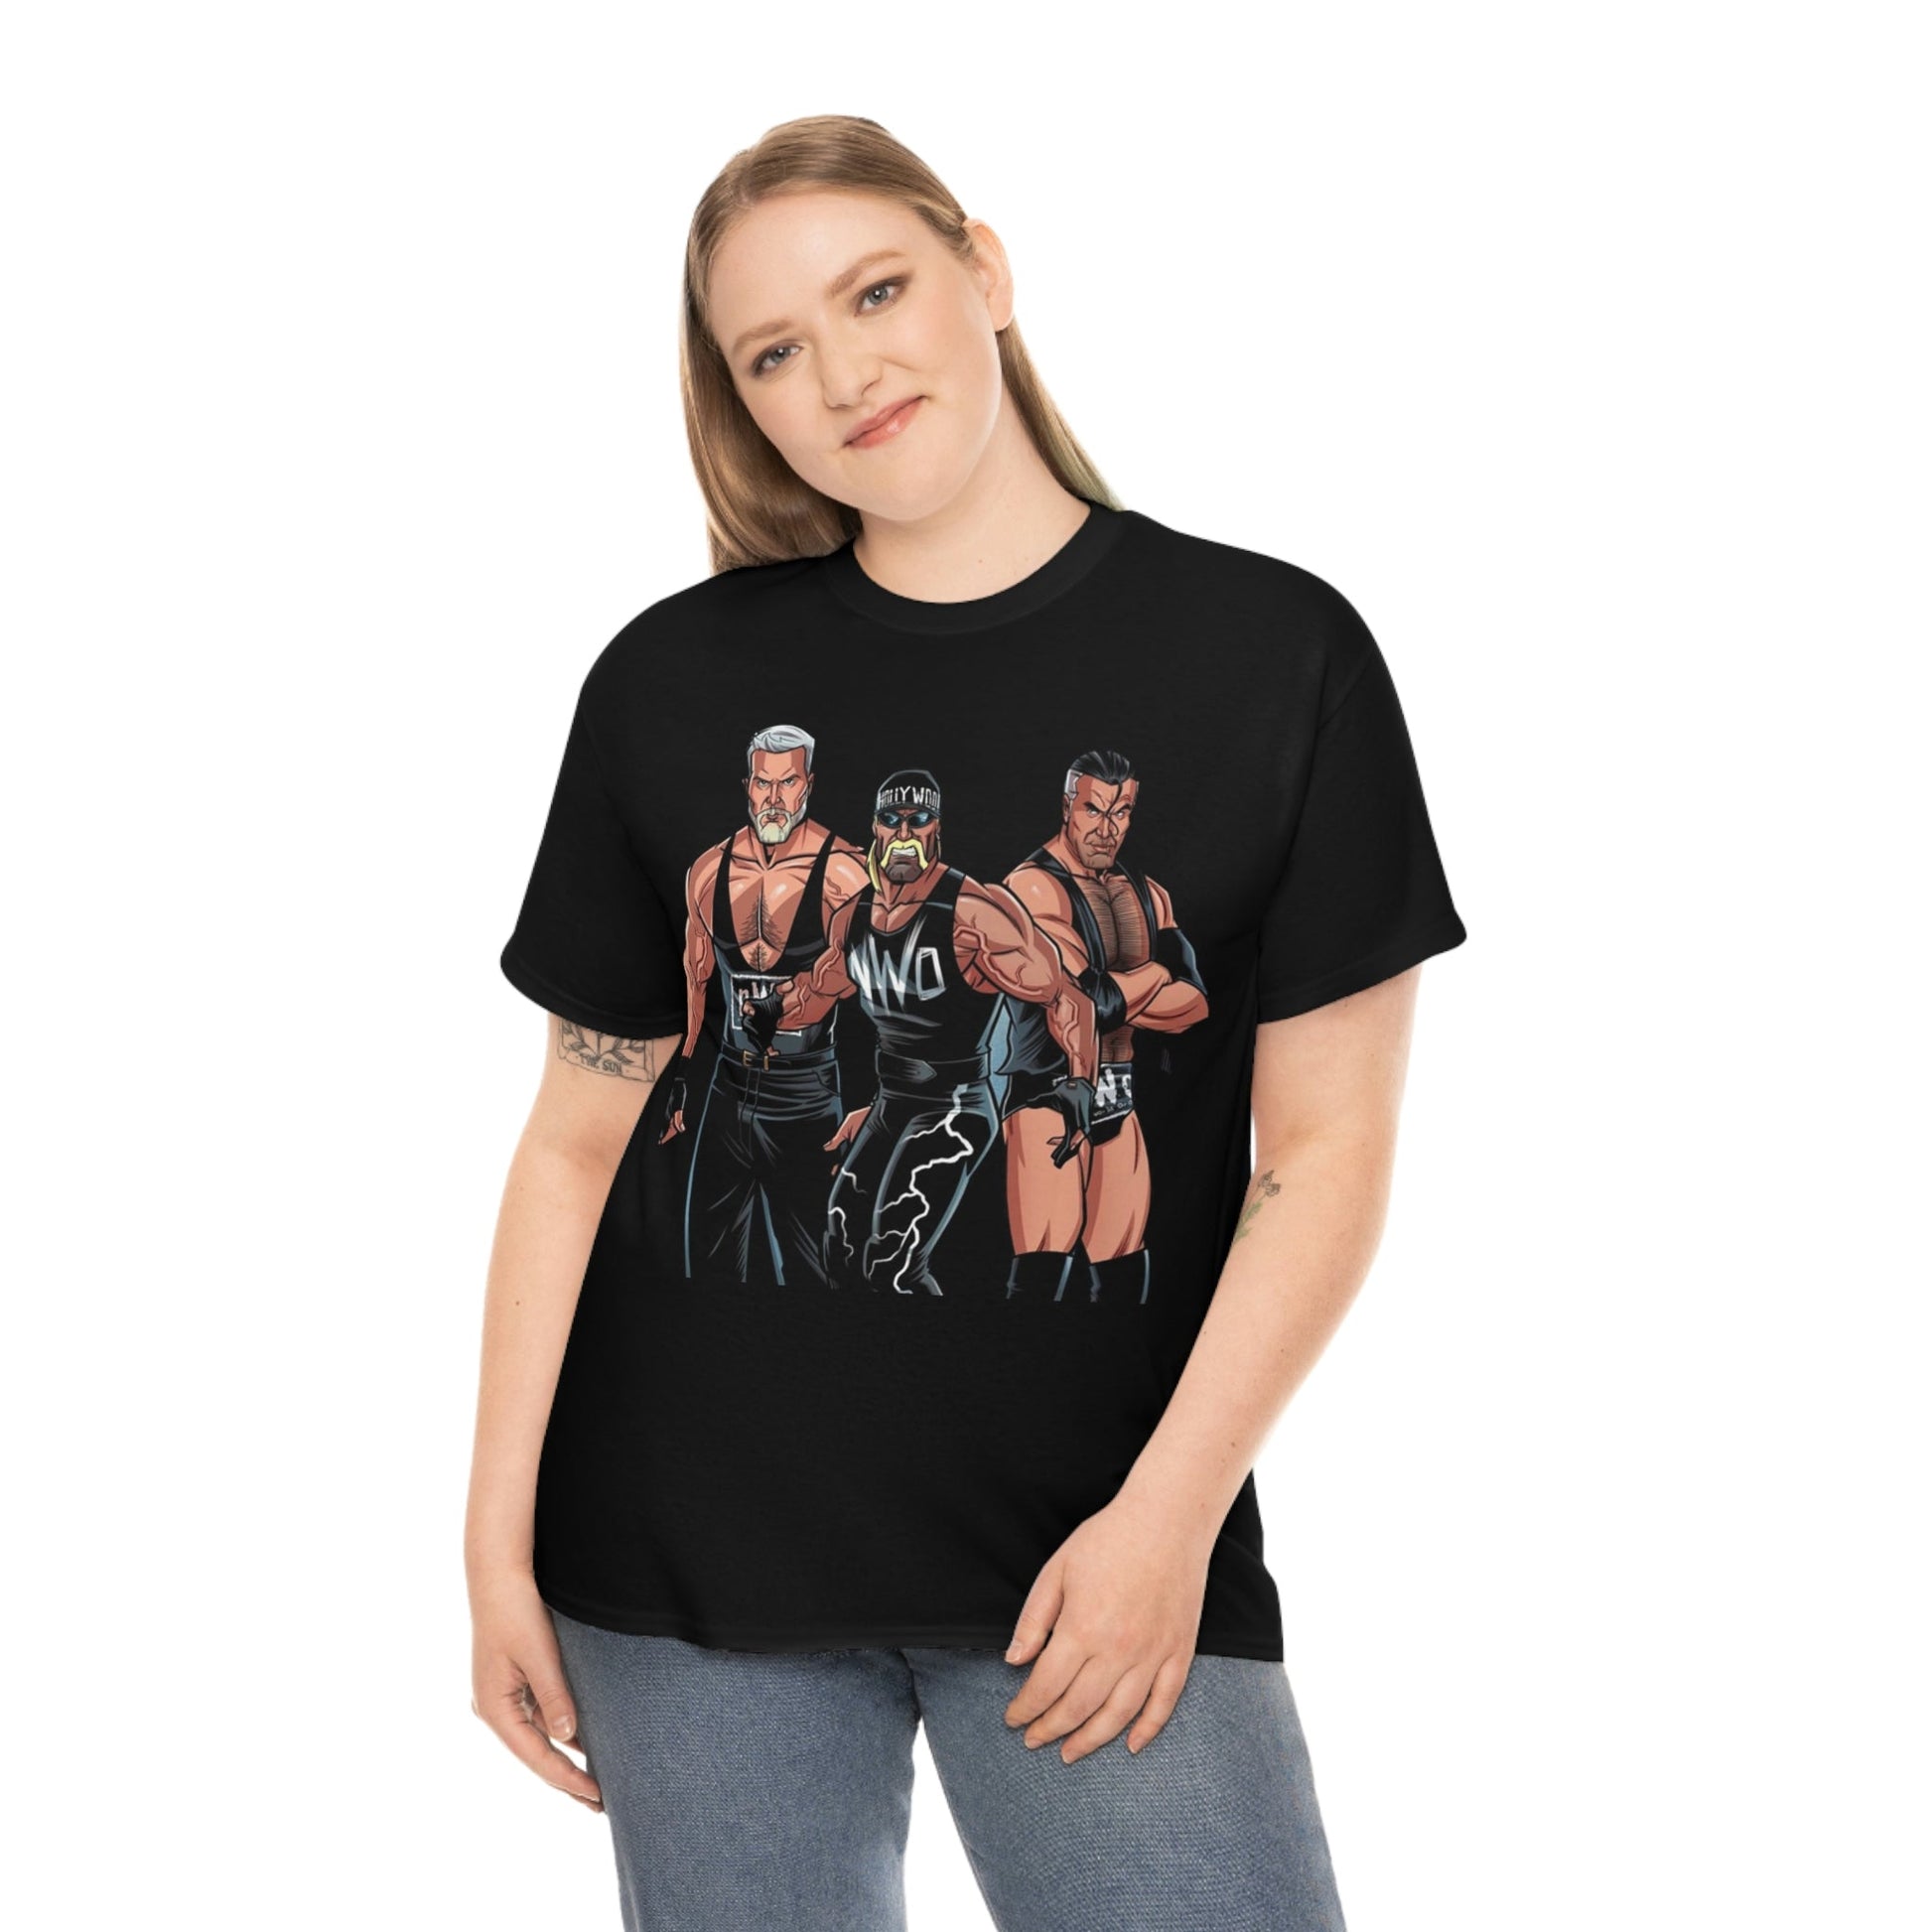 NWO Black And White Founders T-Shirt - RetroTeeShop